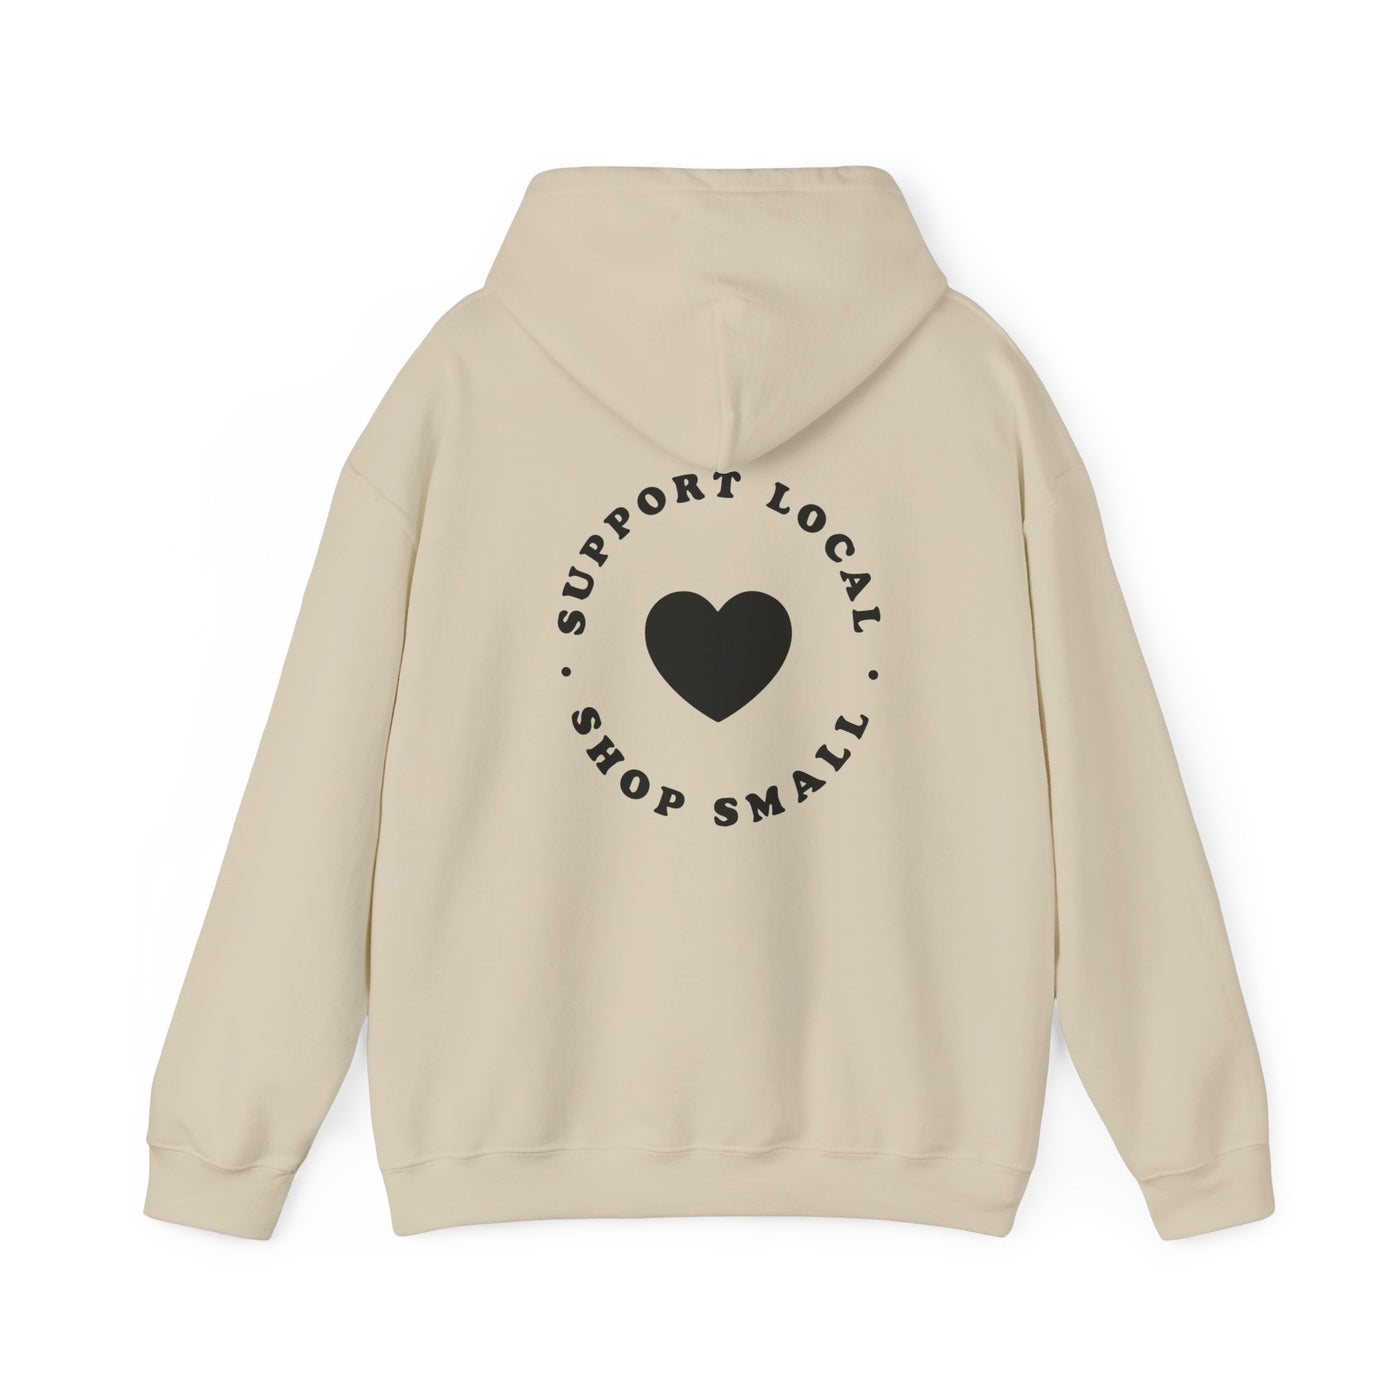 Support Local Shop Small Hooded Sweatshirt